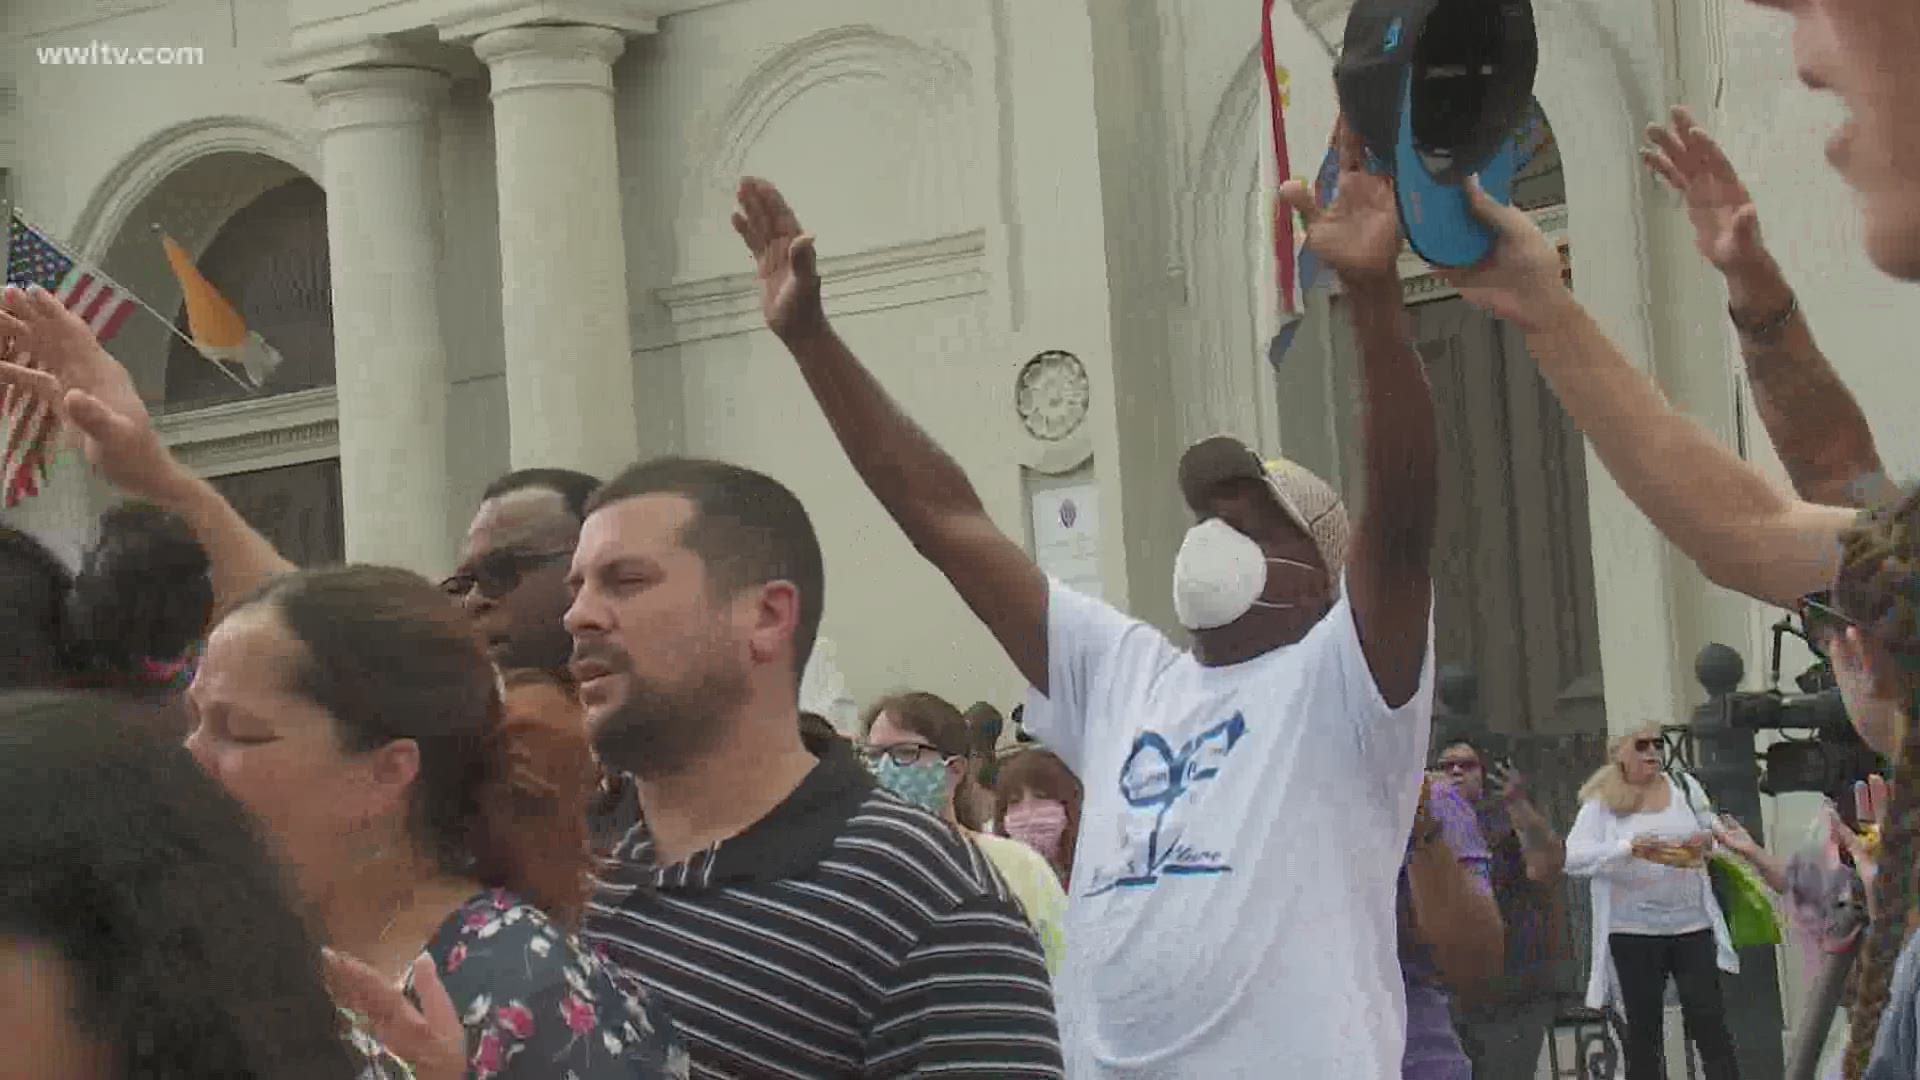 "It makes me feel good to see our city protesting, doing it the right way," Green said.